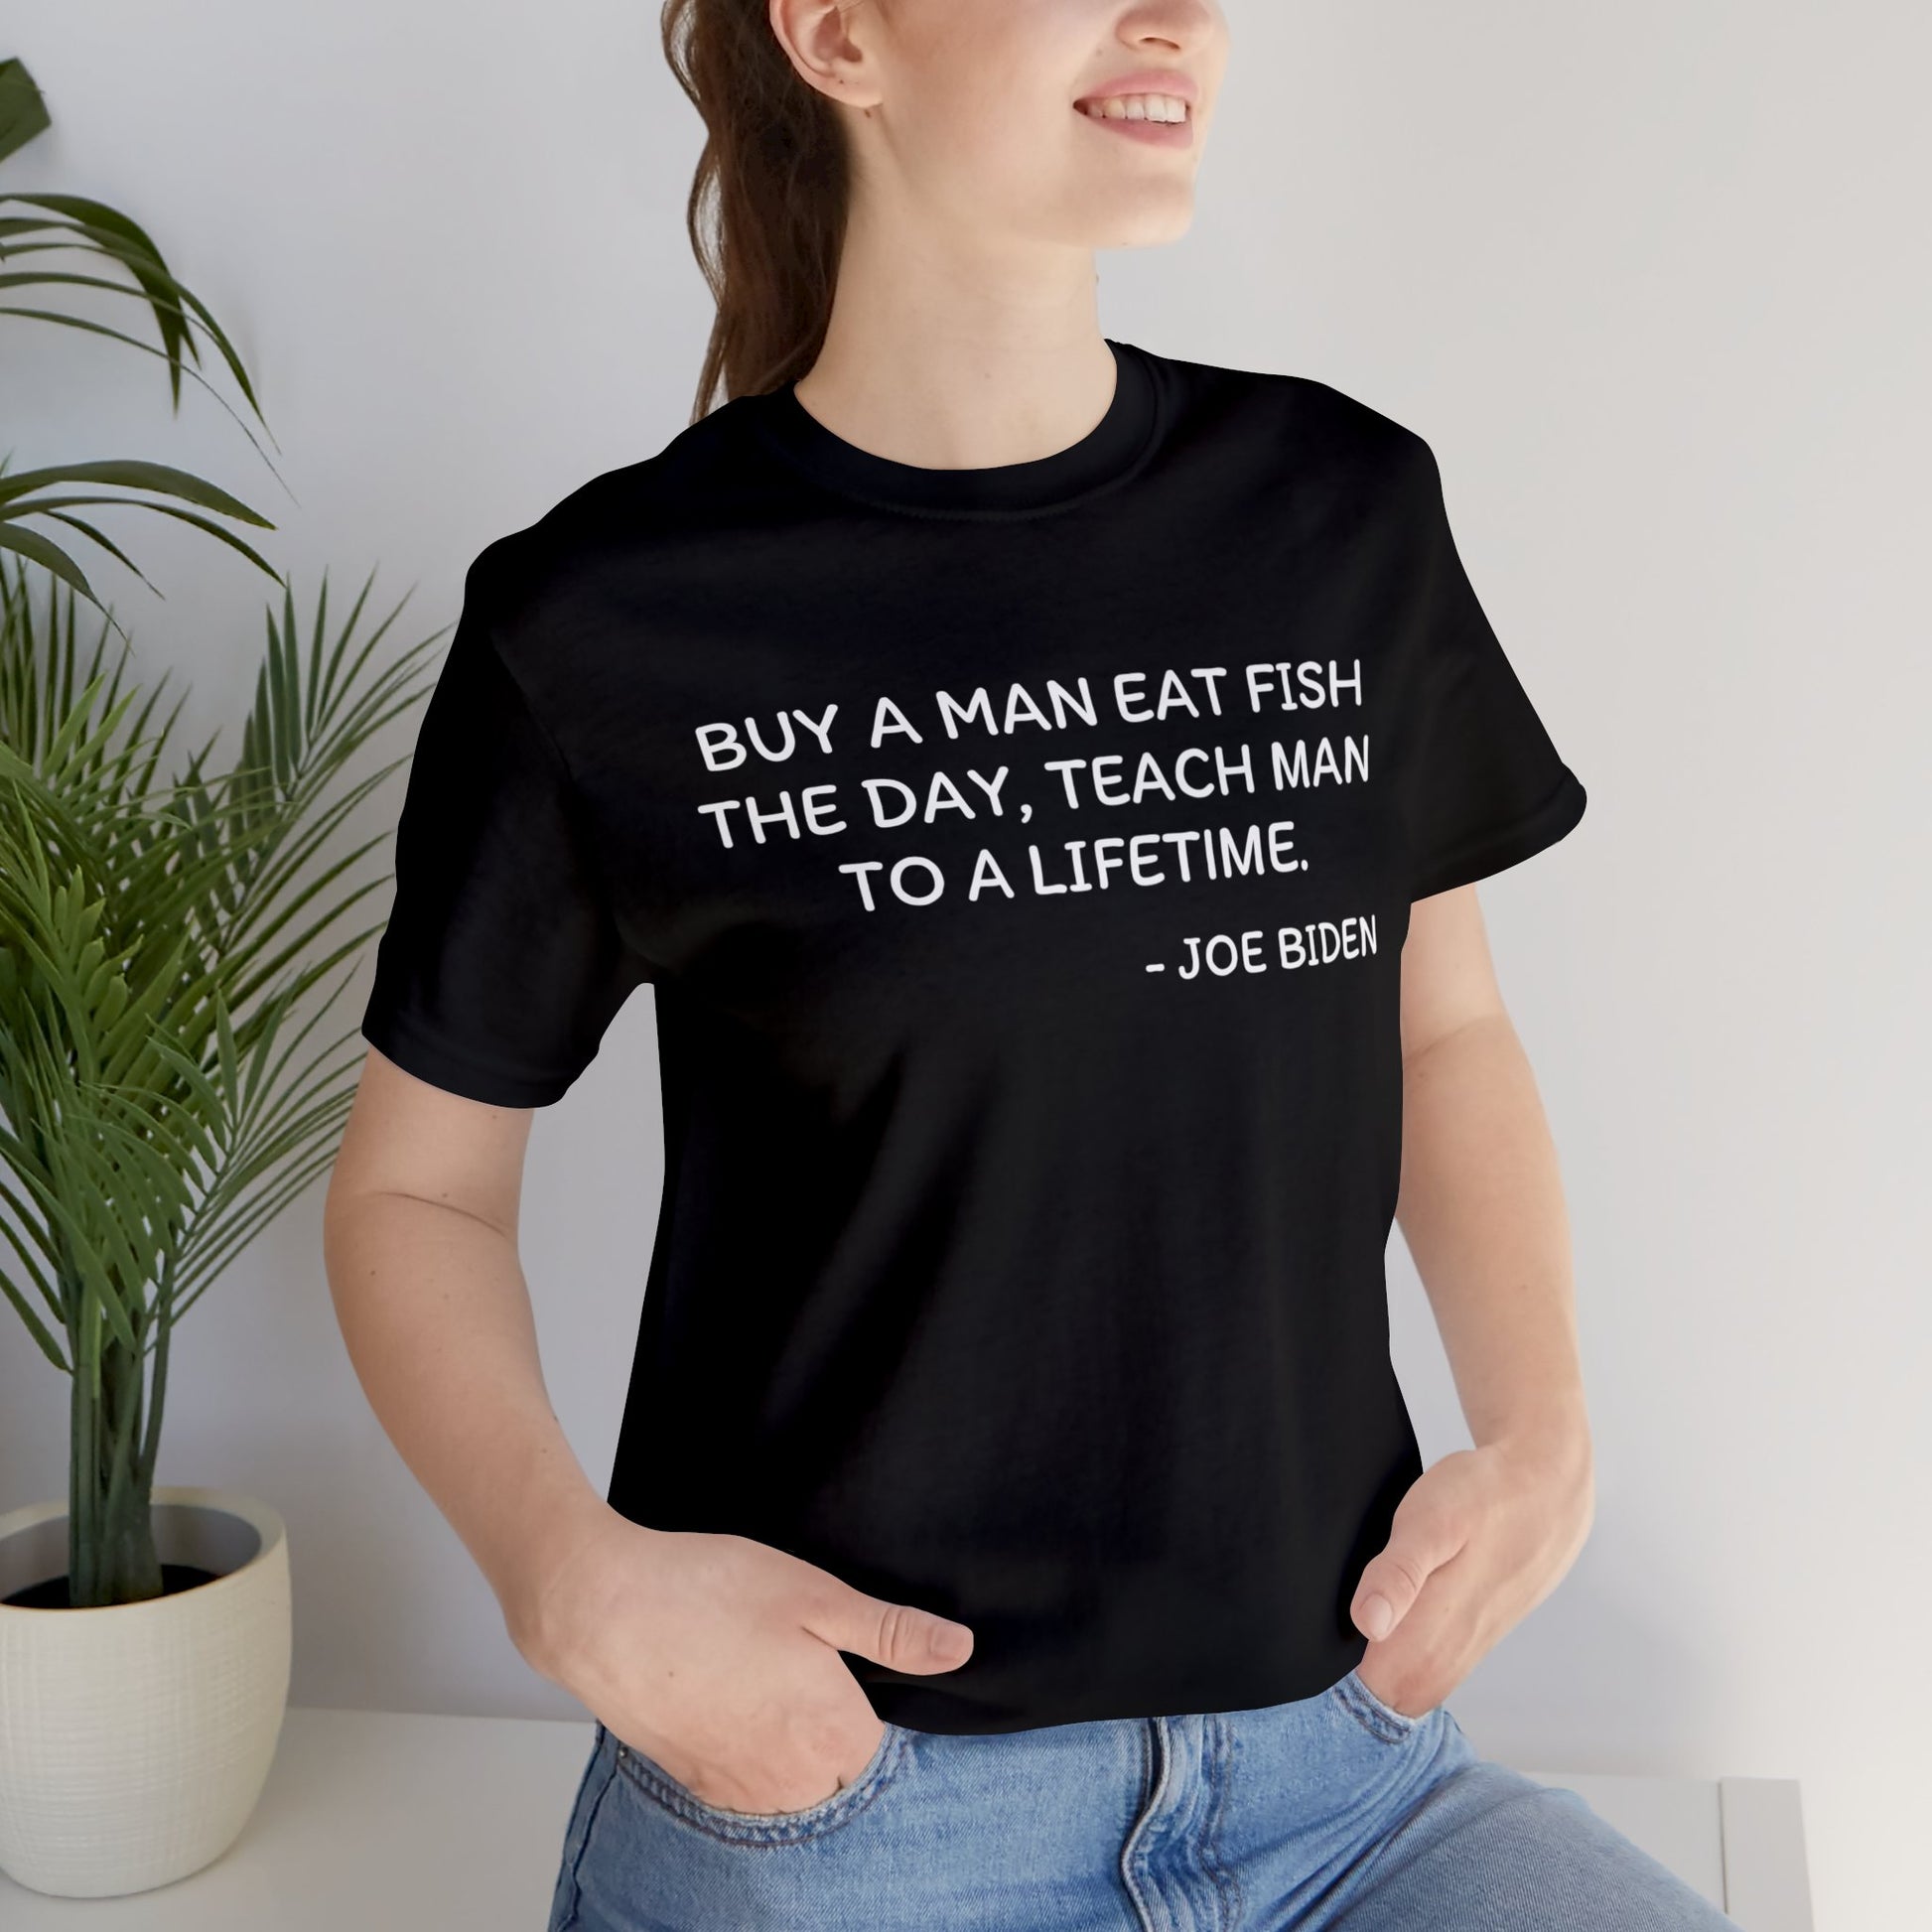 Joe Biden Buy a Man Eat Fish T-Shirt, Conservative Humor T-Shirt, Funny Political Quote, Unisex Adult Tee, Casual Comfortable Shirt, Gift for Politically Savvy Friends - News For Reasonable People